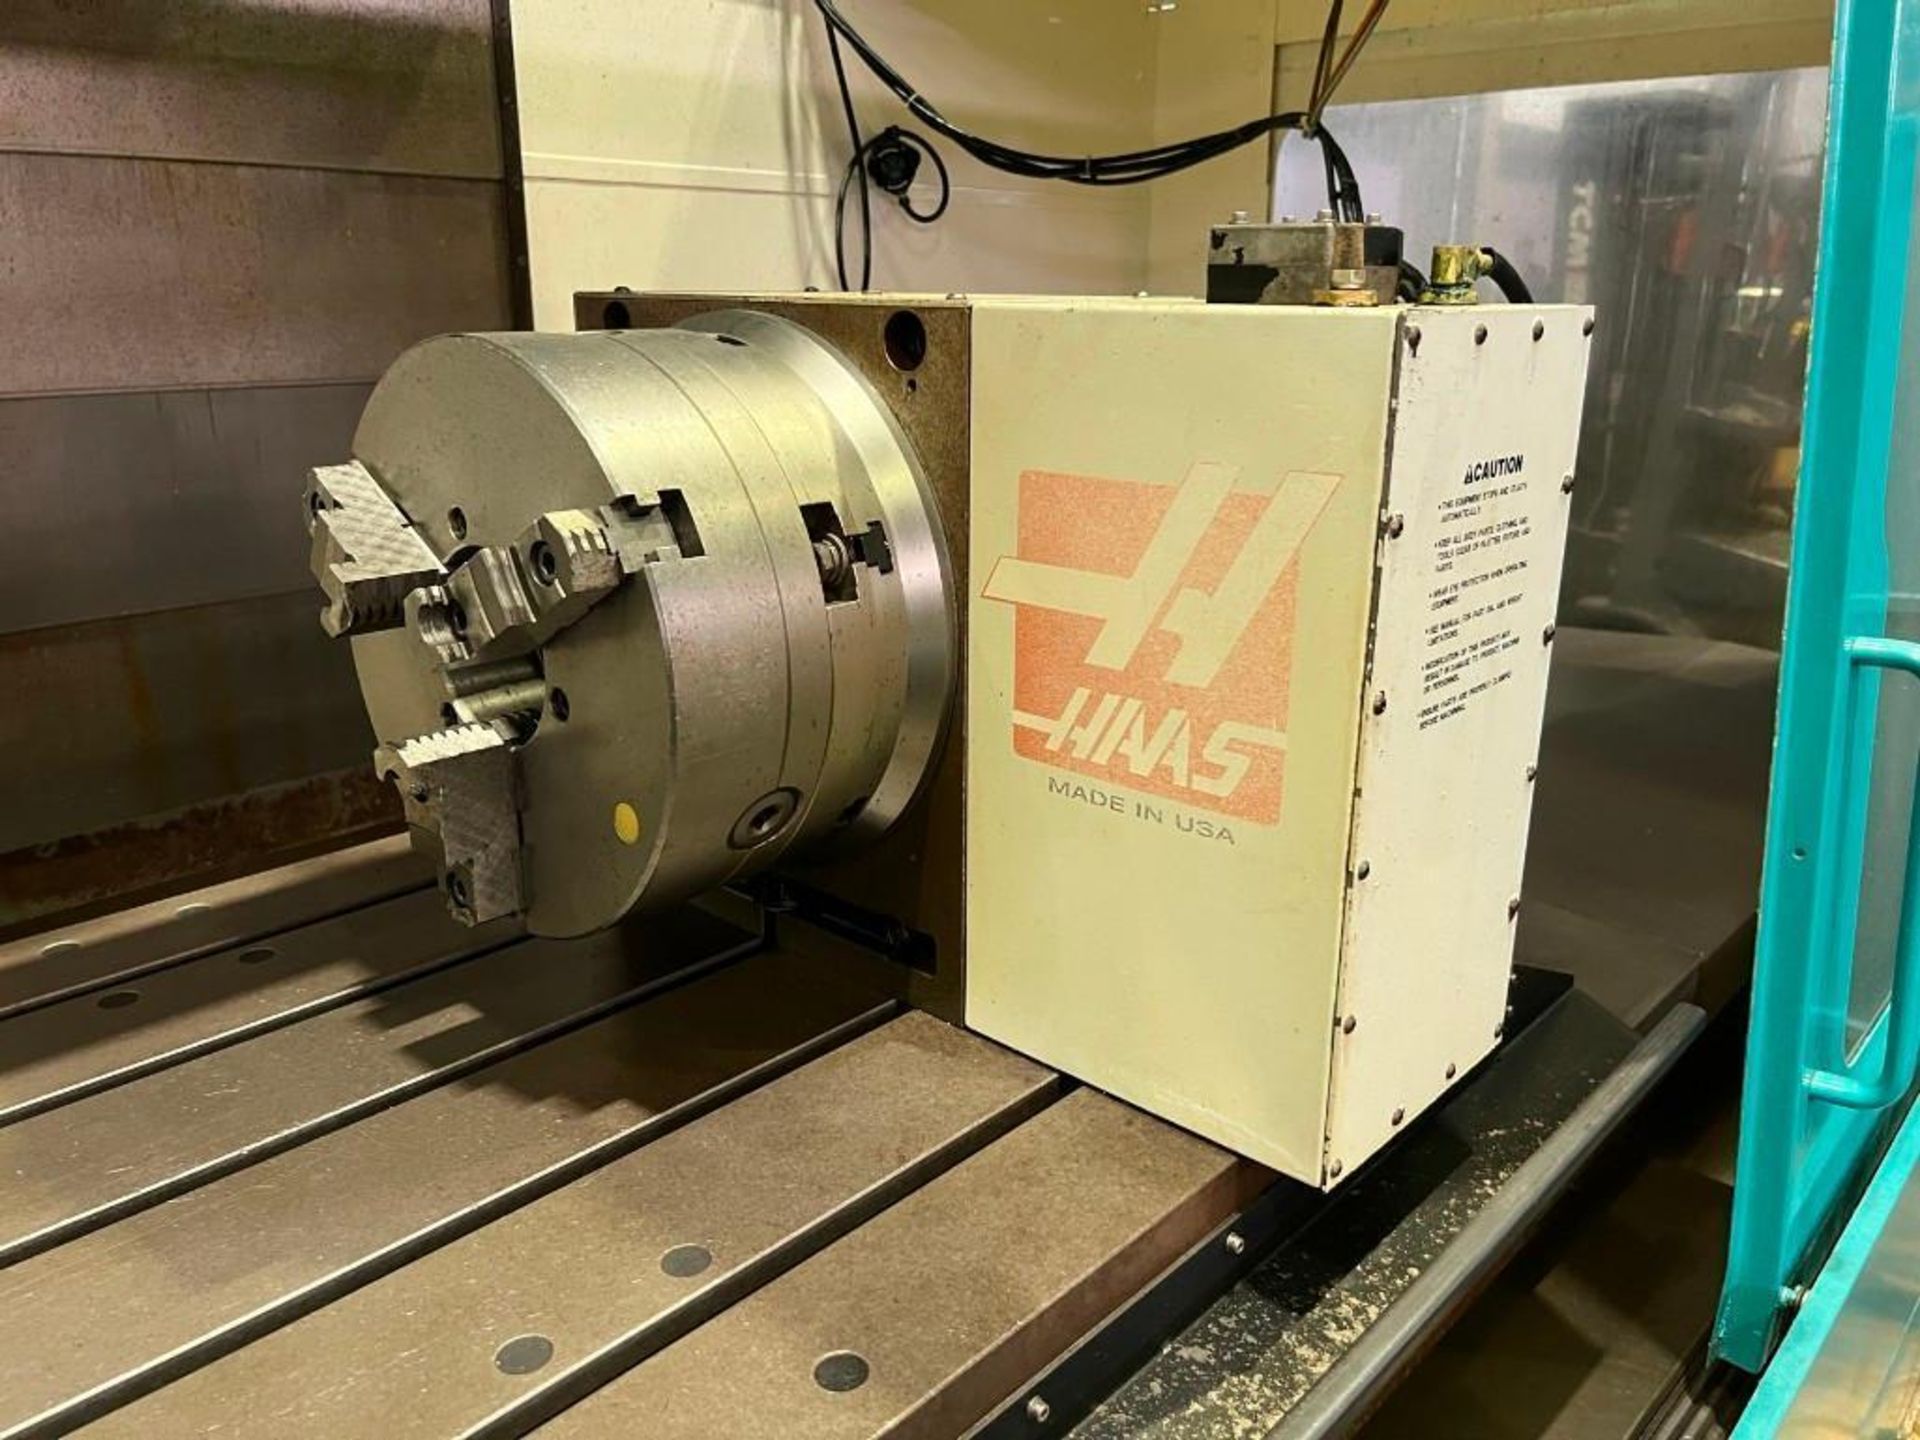 2004 Haas VF6/50 CNC Vertical Machining Center - Image 11 of 34